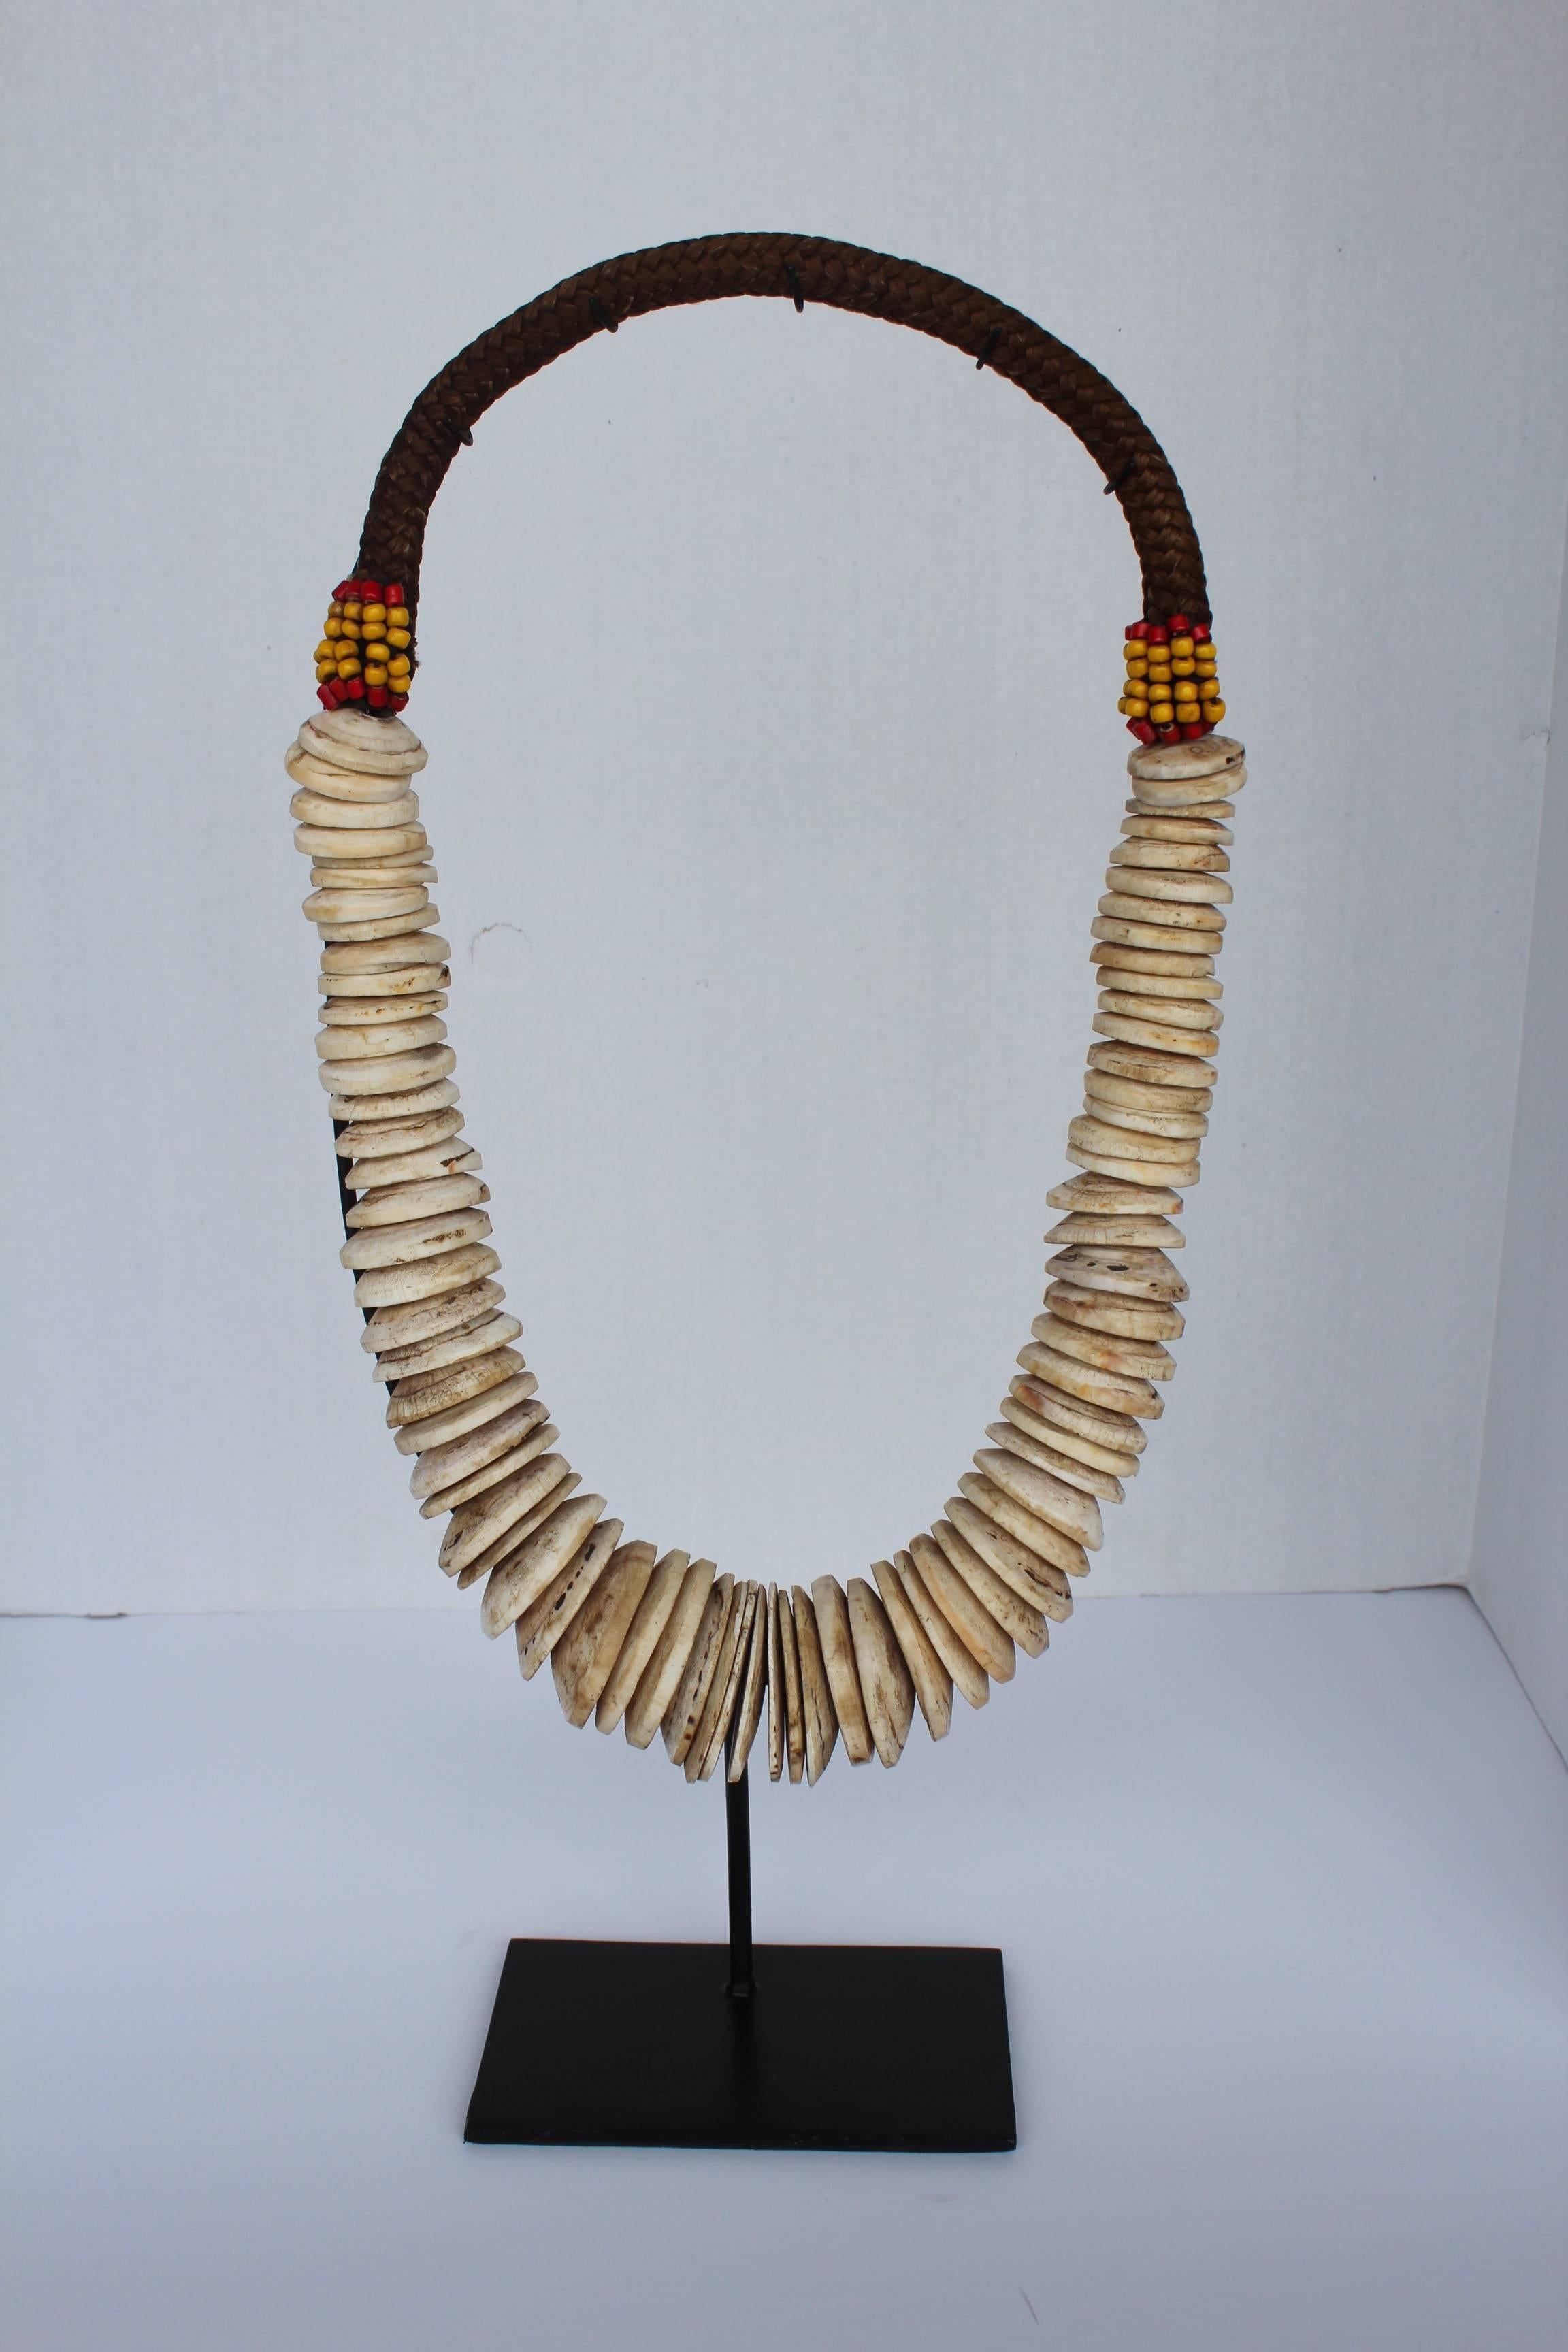 Handmade vintage tribal necklace is decorated with small yellow and red beads surrounded by cowries on handwoven hemp with full grown 90 conus shell discs on a black custom stand. 

The shell disc have been chiseled and polished from a traditional